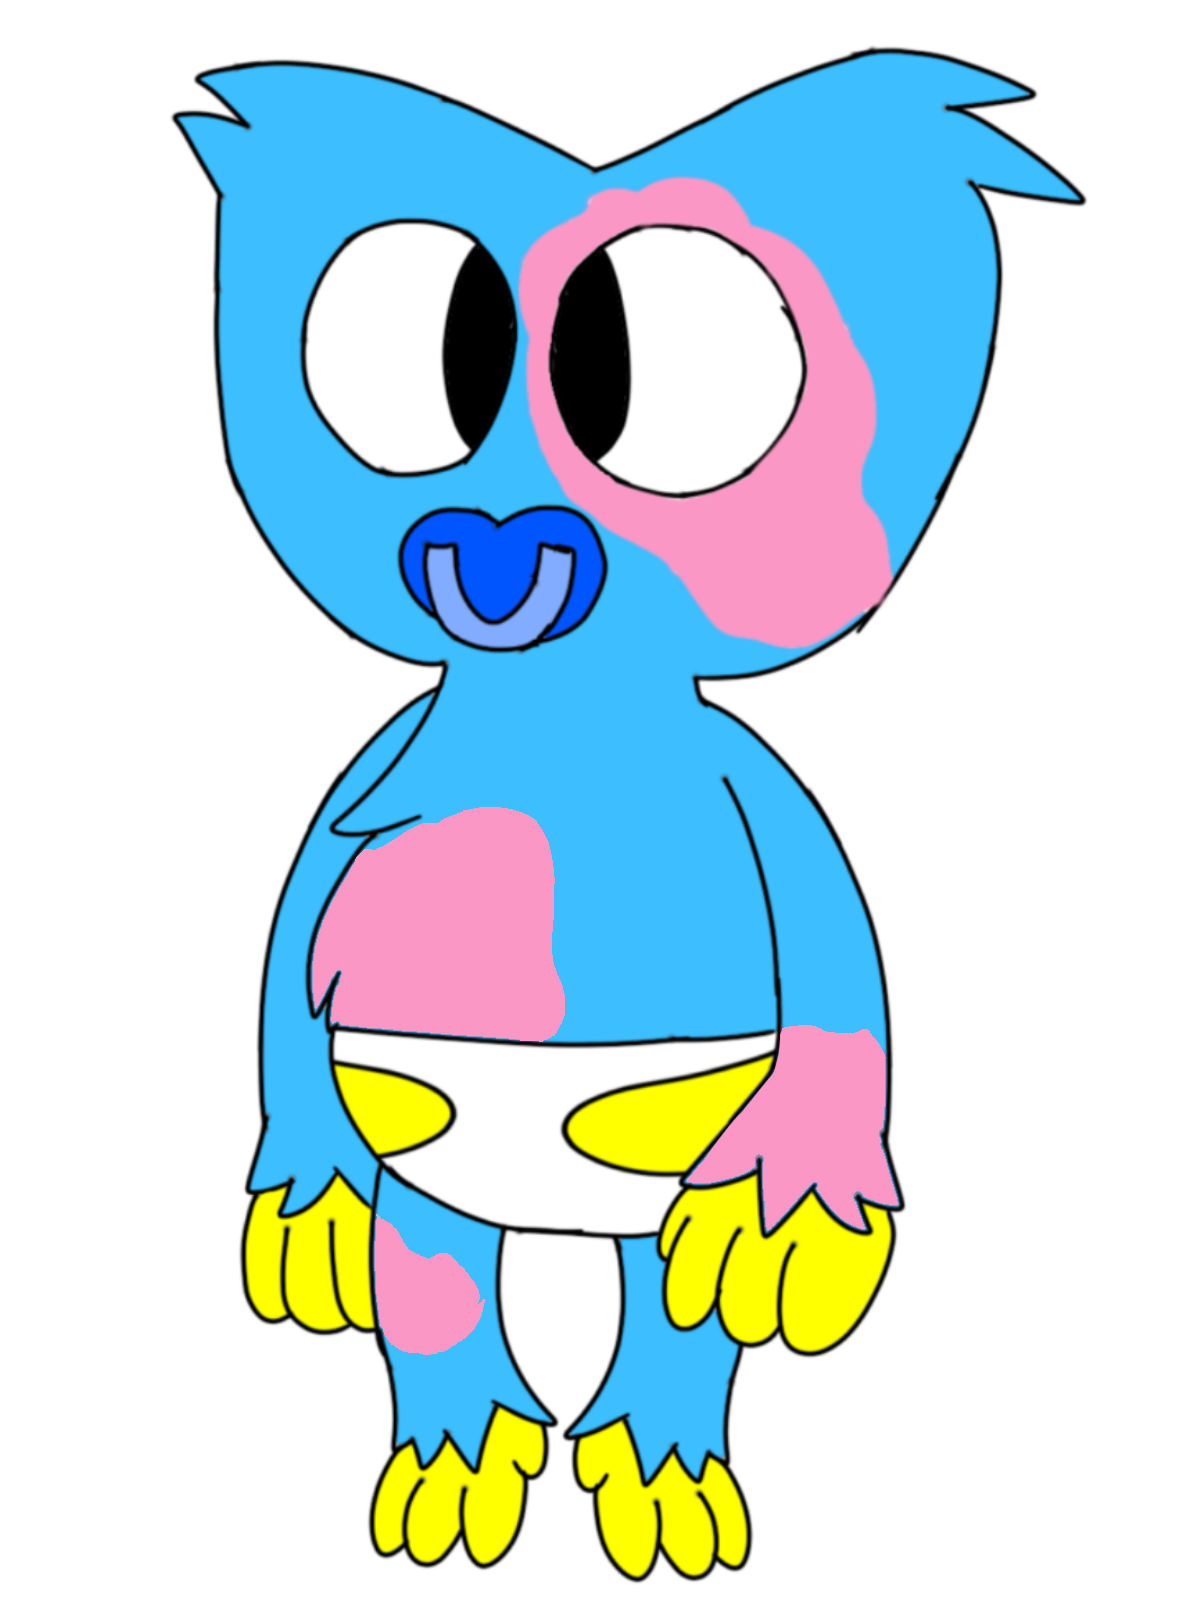 Huggy wuggy and Kissy missy's child remake(no name yet)